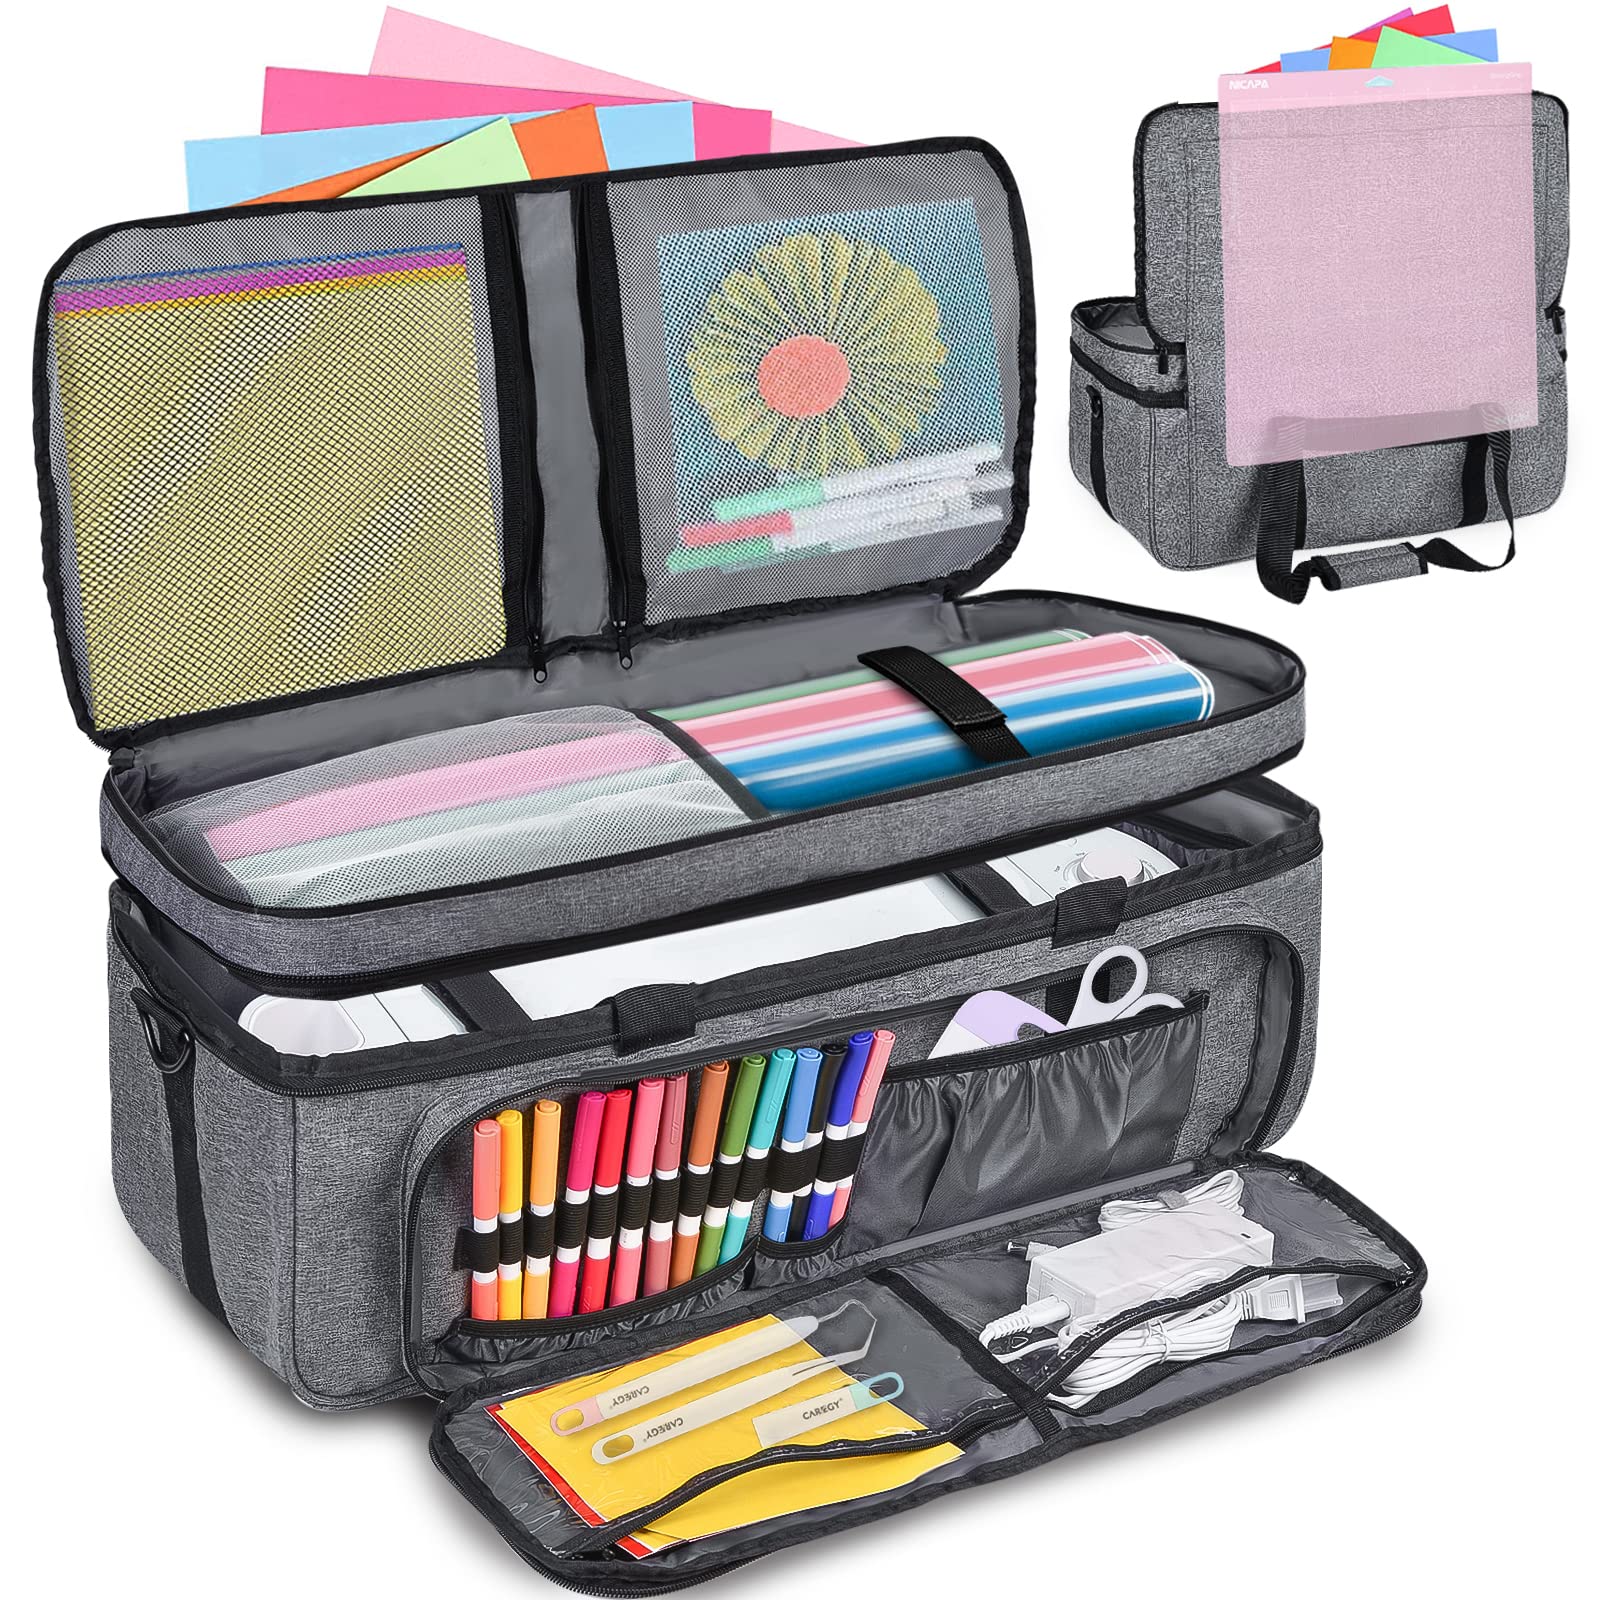 Carrying Case for Cricut Maker, Double-Layer Cricut Bag for Cricut Machine  with Cover and Cutting Mat Pocket Compatible with Cricut Explore Air, Air  2, Maker, Maker 3, Organization and Storage Bags, Cricut